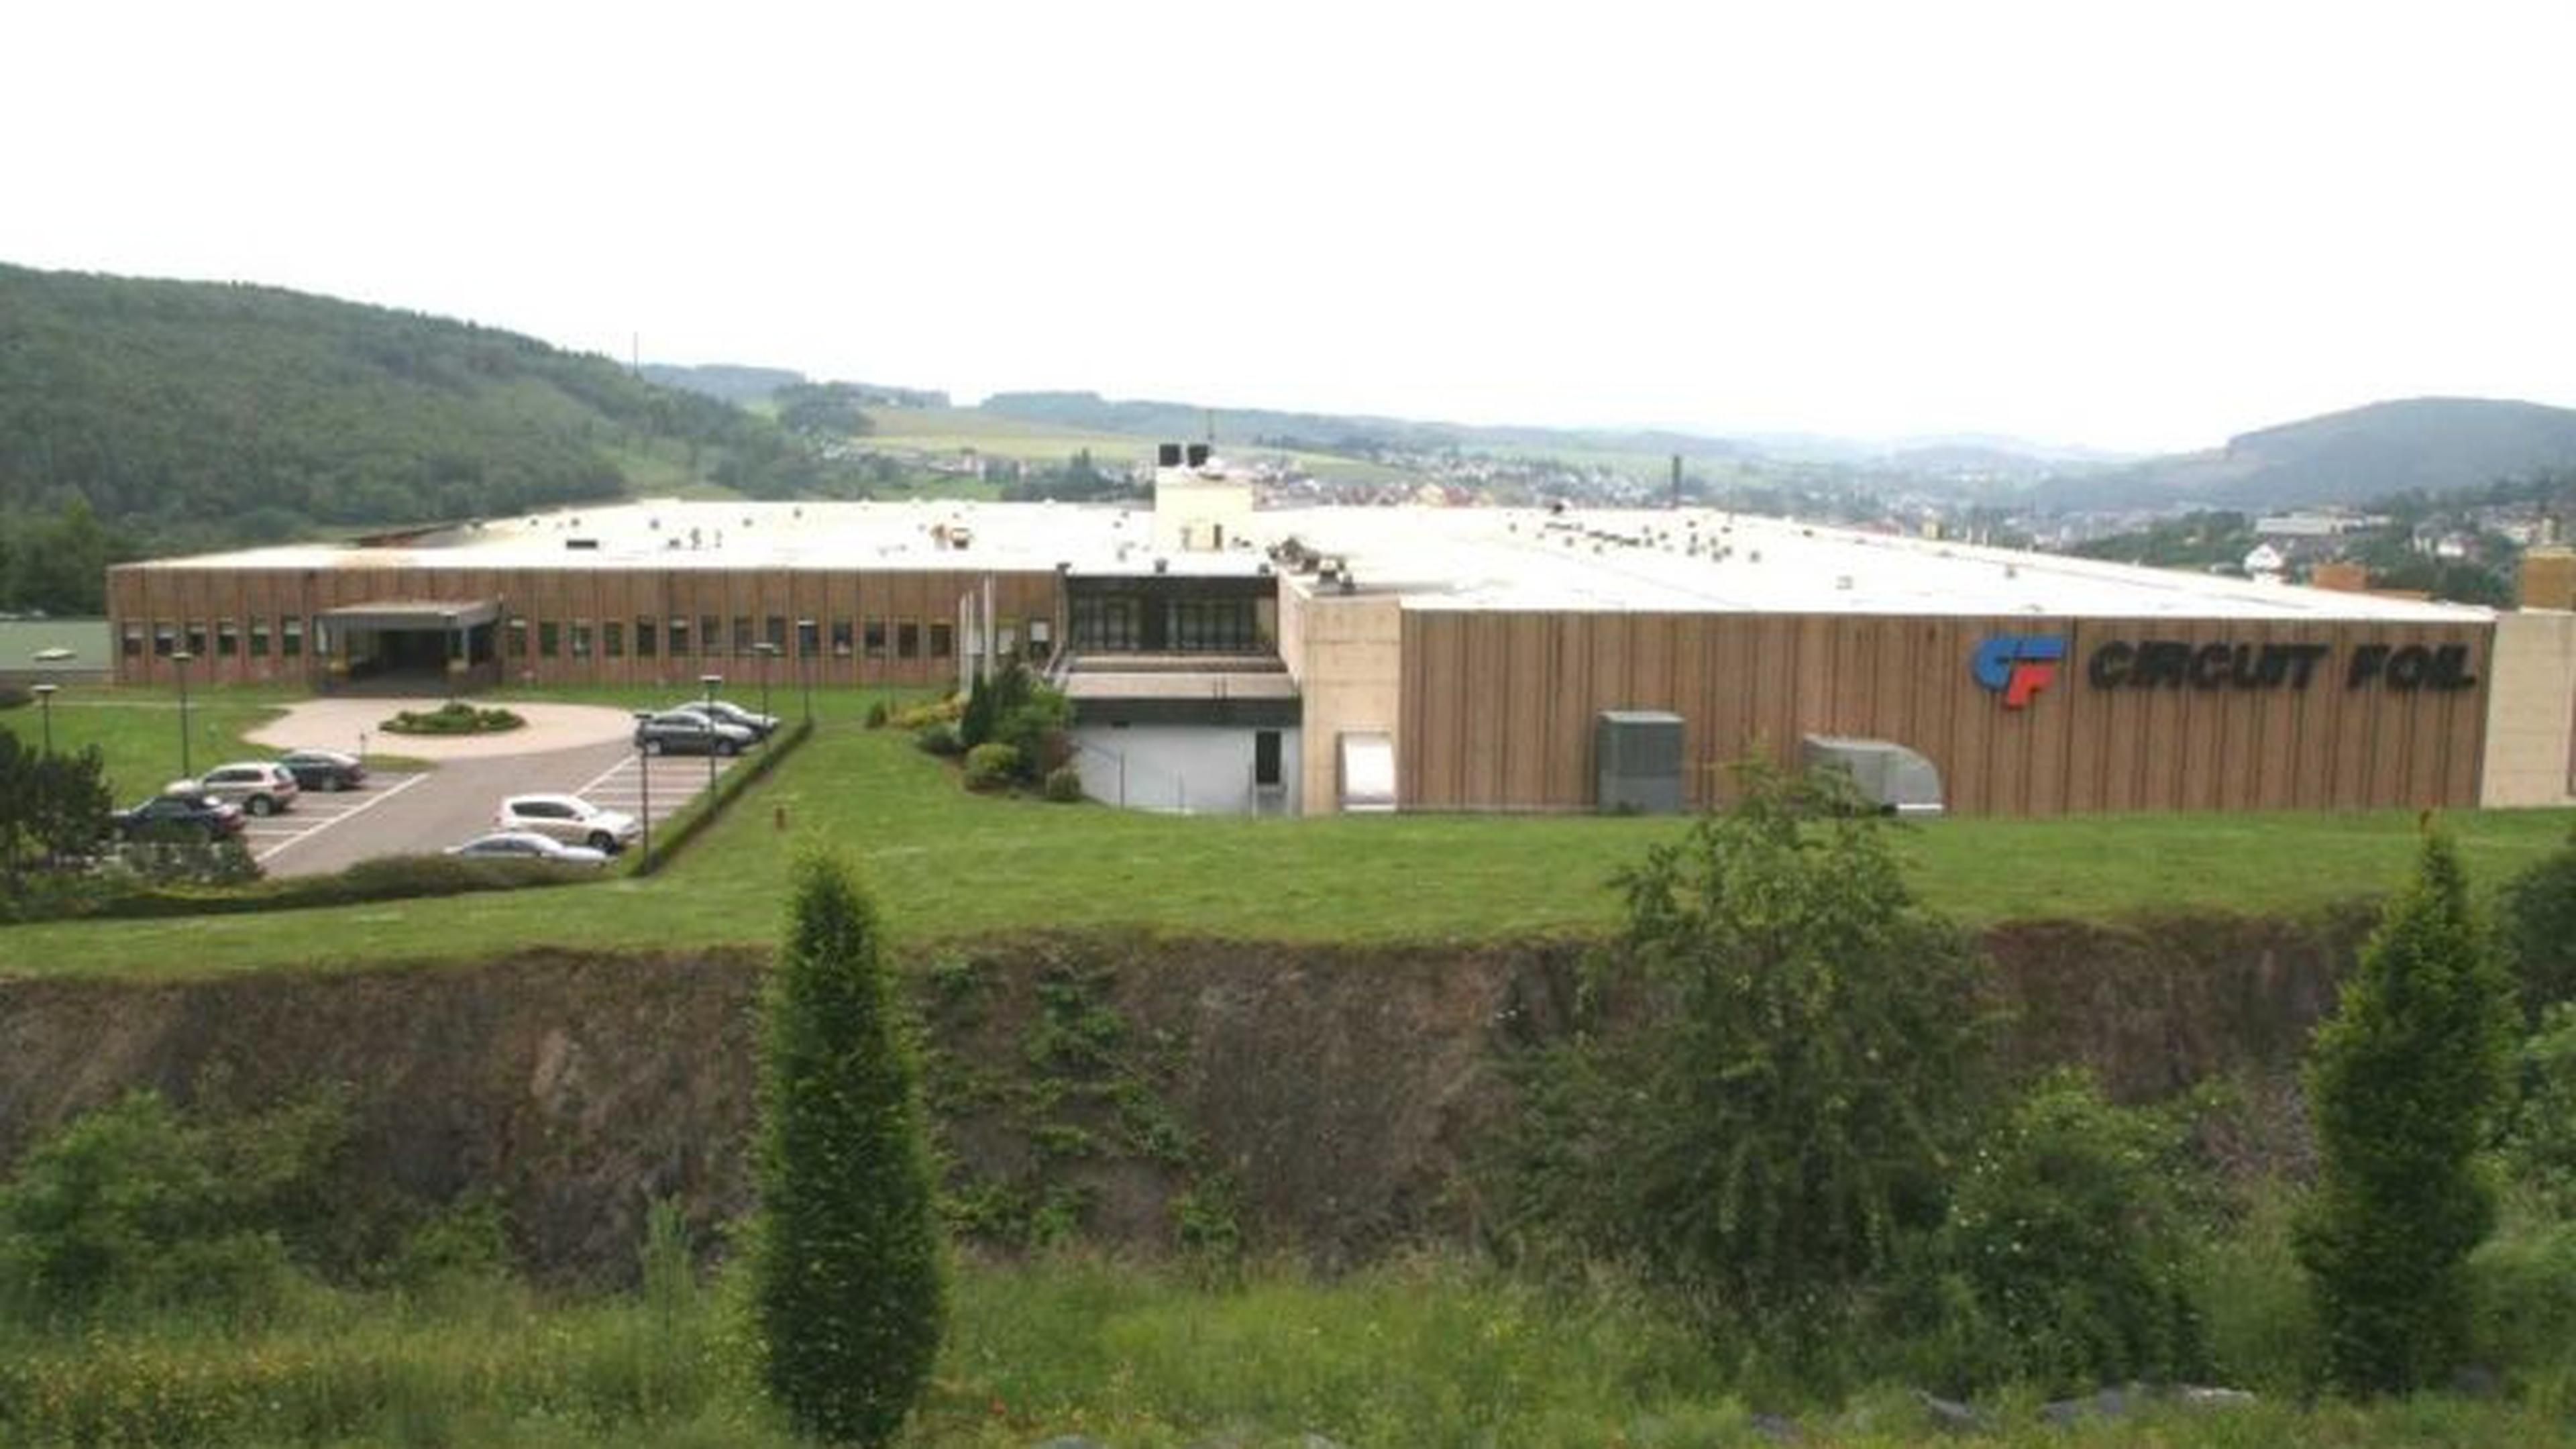 Based in Wiltz, Circuit Foil established presence in Luxembourg in 1960. It says it has suffered substantial financial losses since 2022.